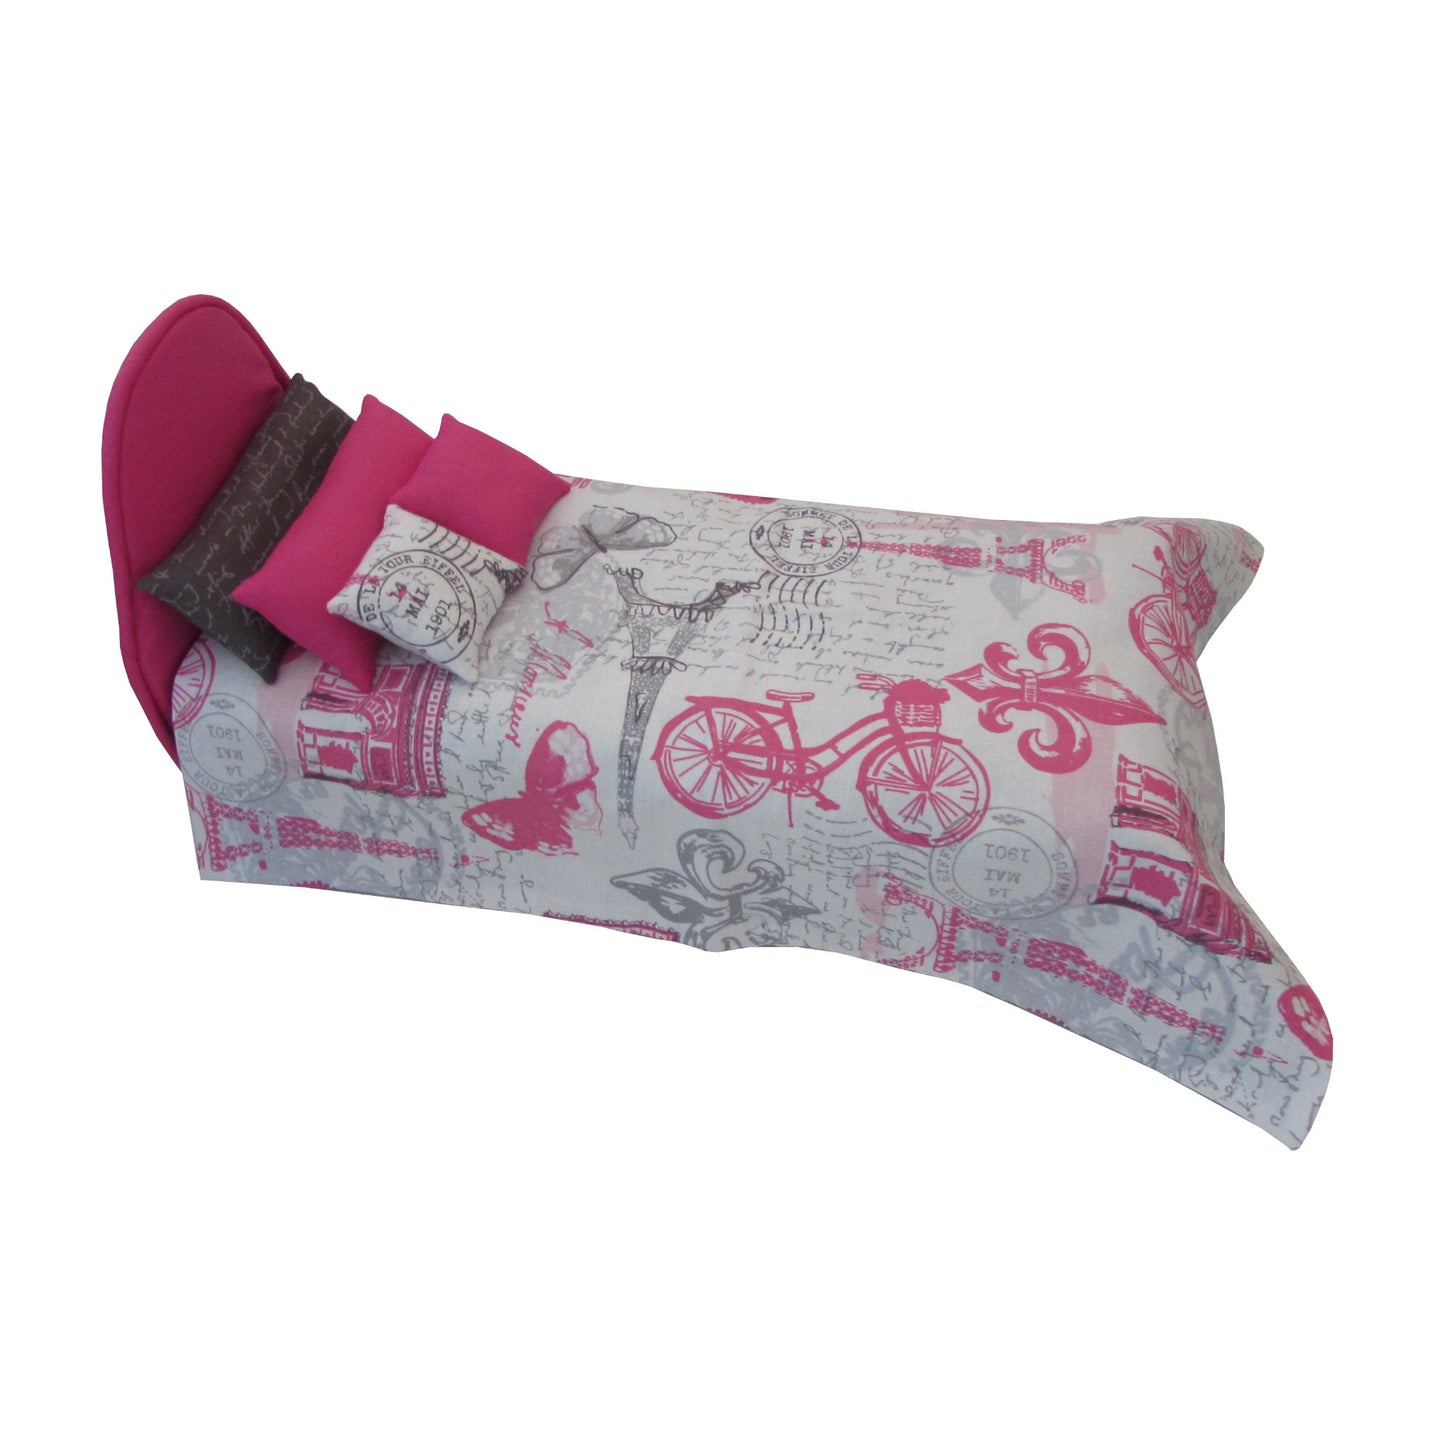 Bright Pink Doll Bed Paris Print Doll Bedding for 11.5-inch and 12-inch dolls